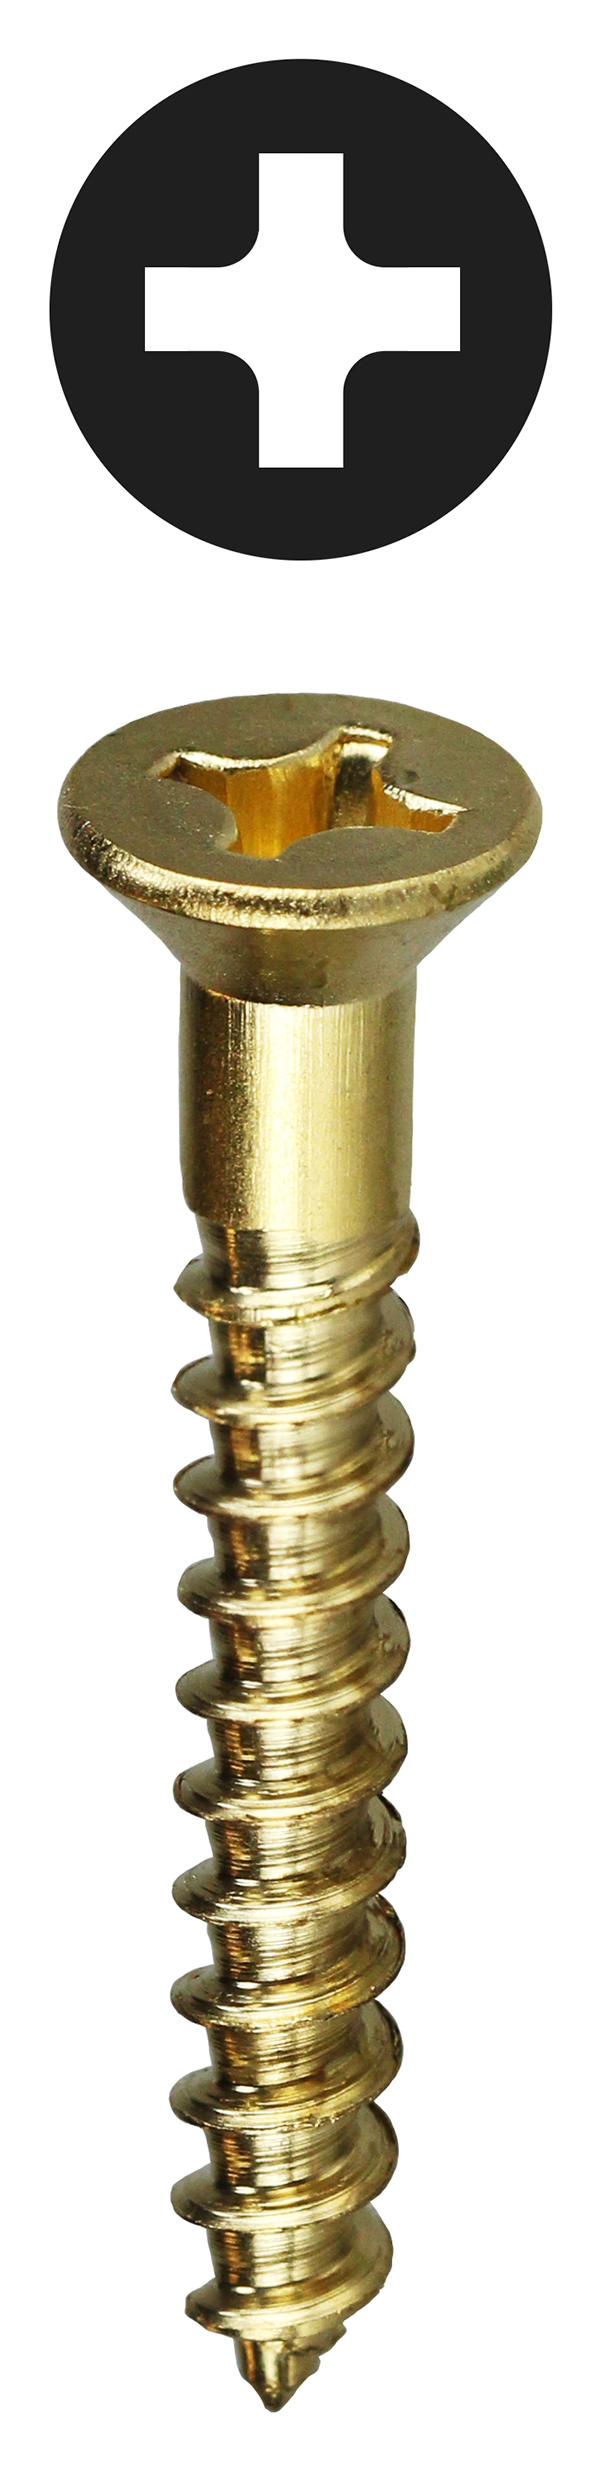 Flat Head Wood Screw, Brass material, #10 x 3/4 in. Size, Zinc Plated Finish, Phillips drive type